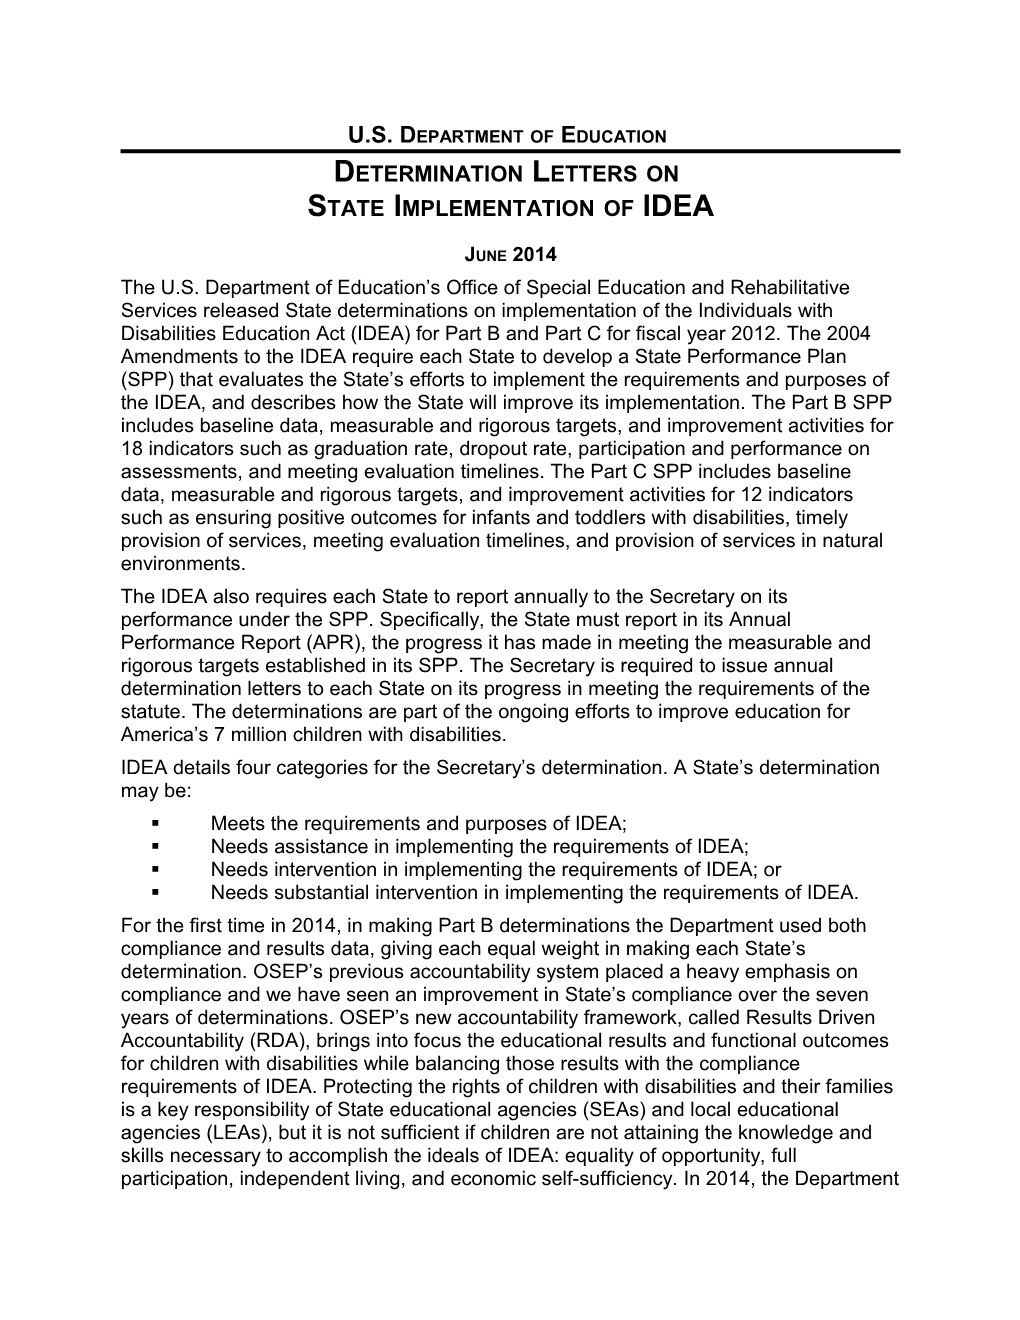 2014 Determination Letters on State Implementation of IDEA. June 2014 (MS Word)